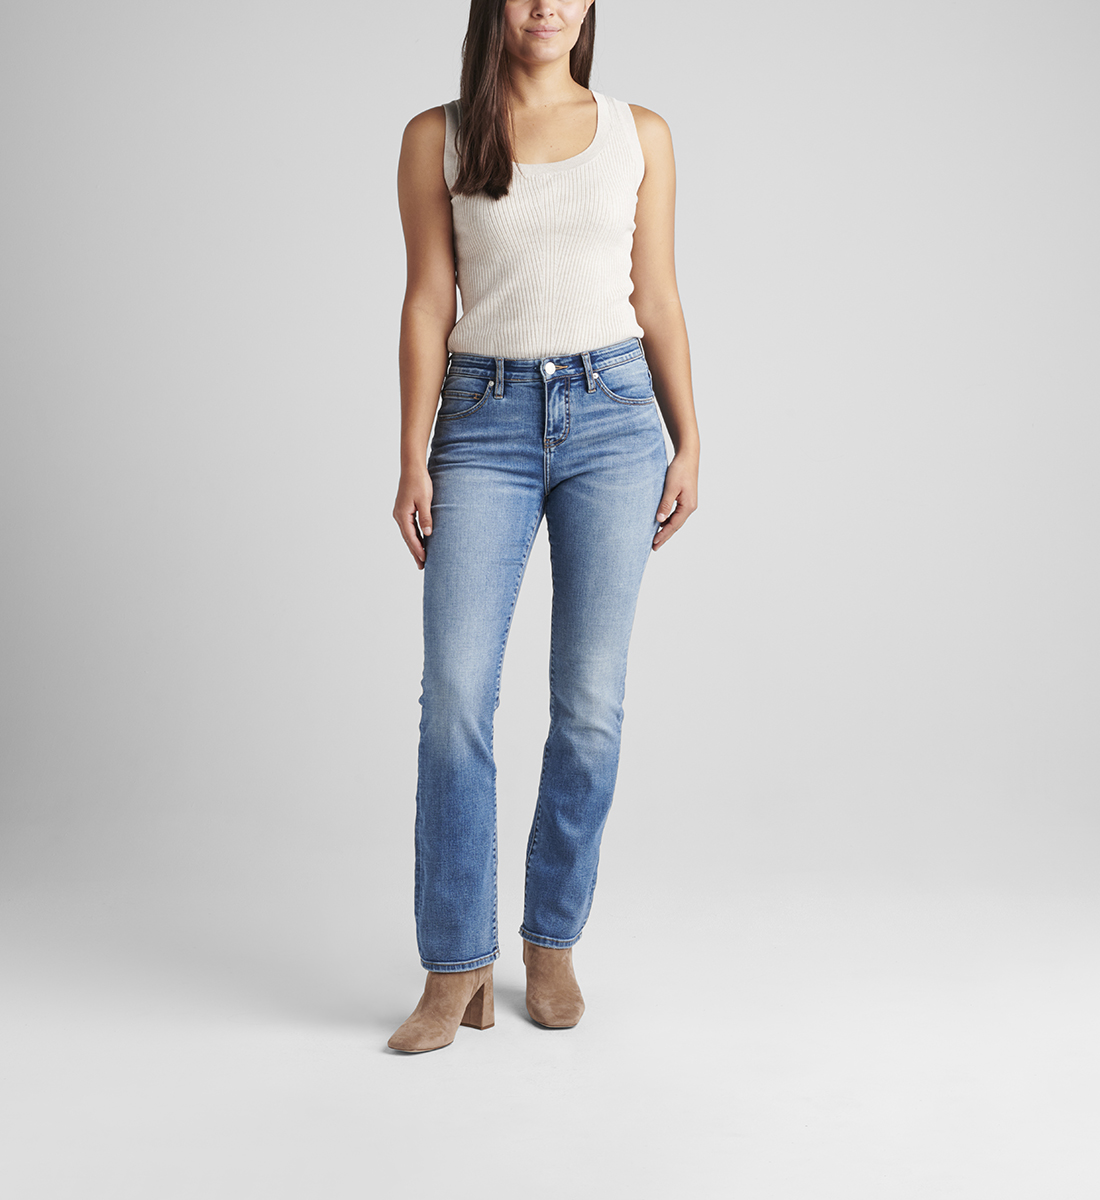 Eloise Mid Rise Bootcut Jeans - Jag Jeans CA